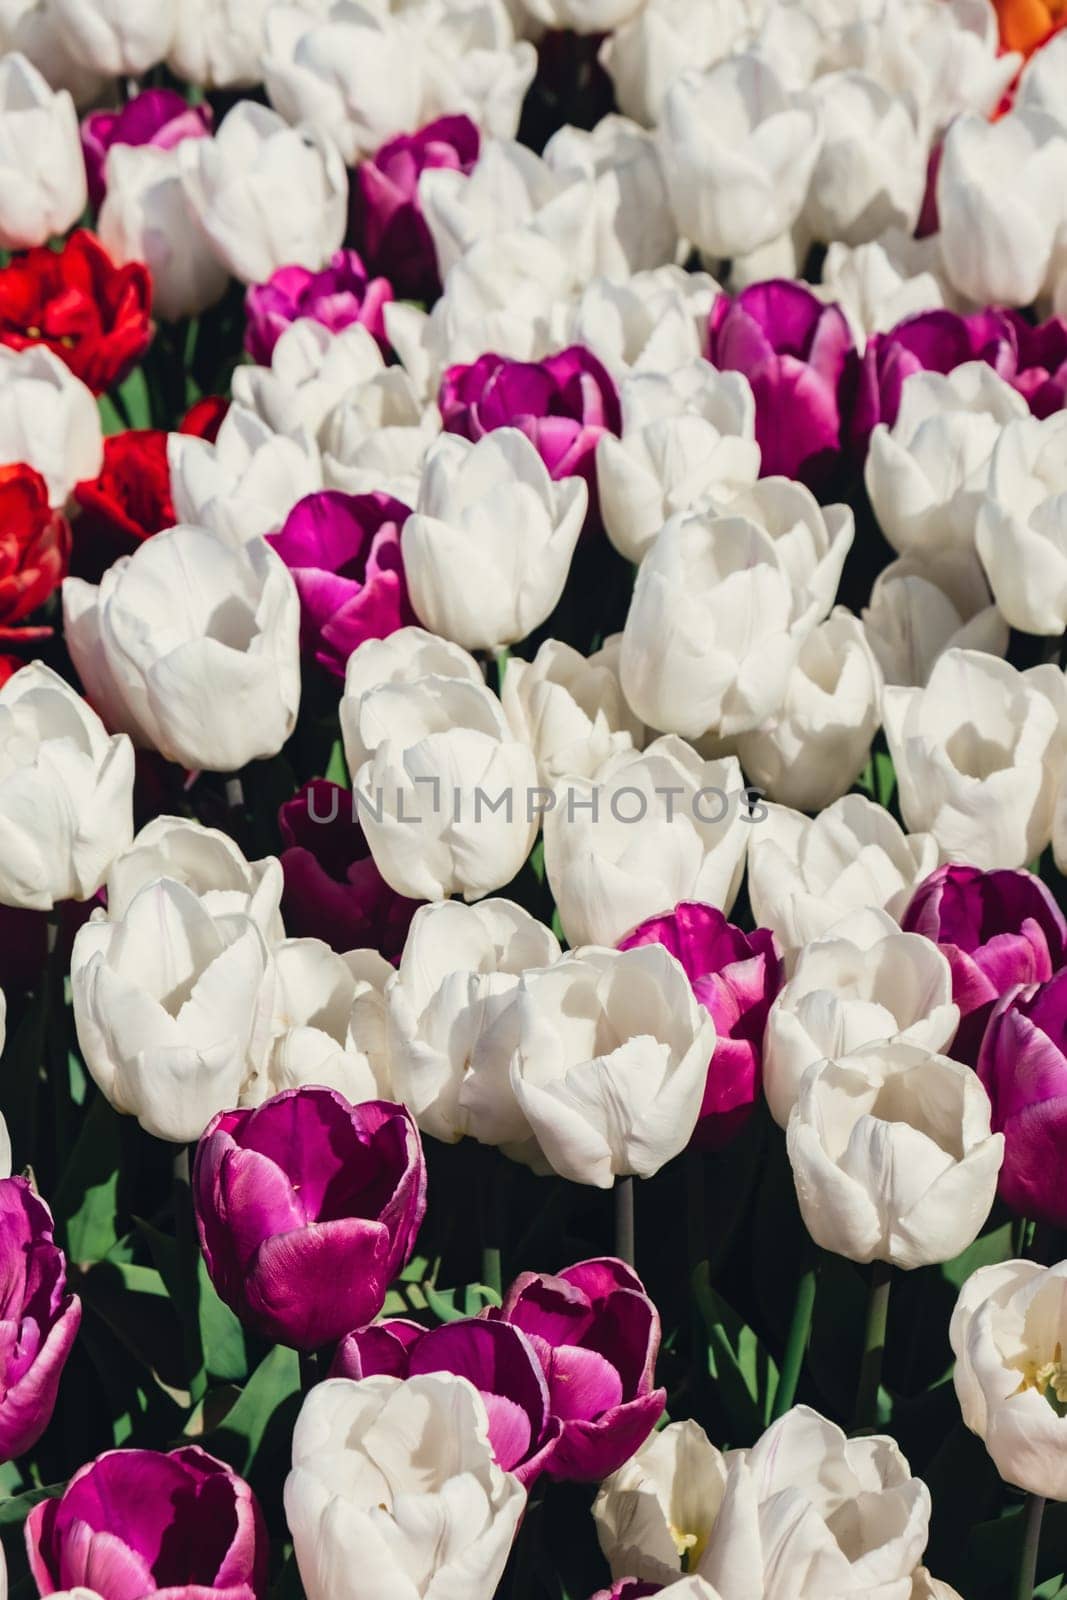 Blooming floral park in sunrise light. Colorful Tulip flowers blooming in the garden field landscape. Beautiful spring garden with many red tulips outdoors. Stripped tulips growing in flourish meadow sunny day Keukenhof. Natural floral pattern by anna_stasiia